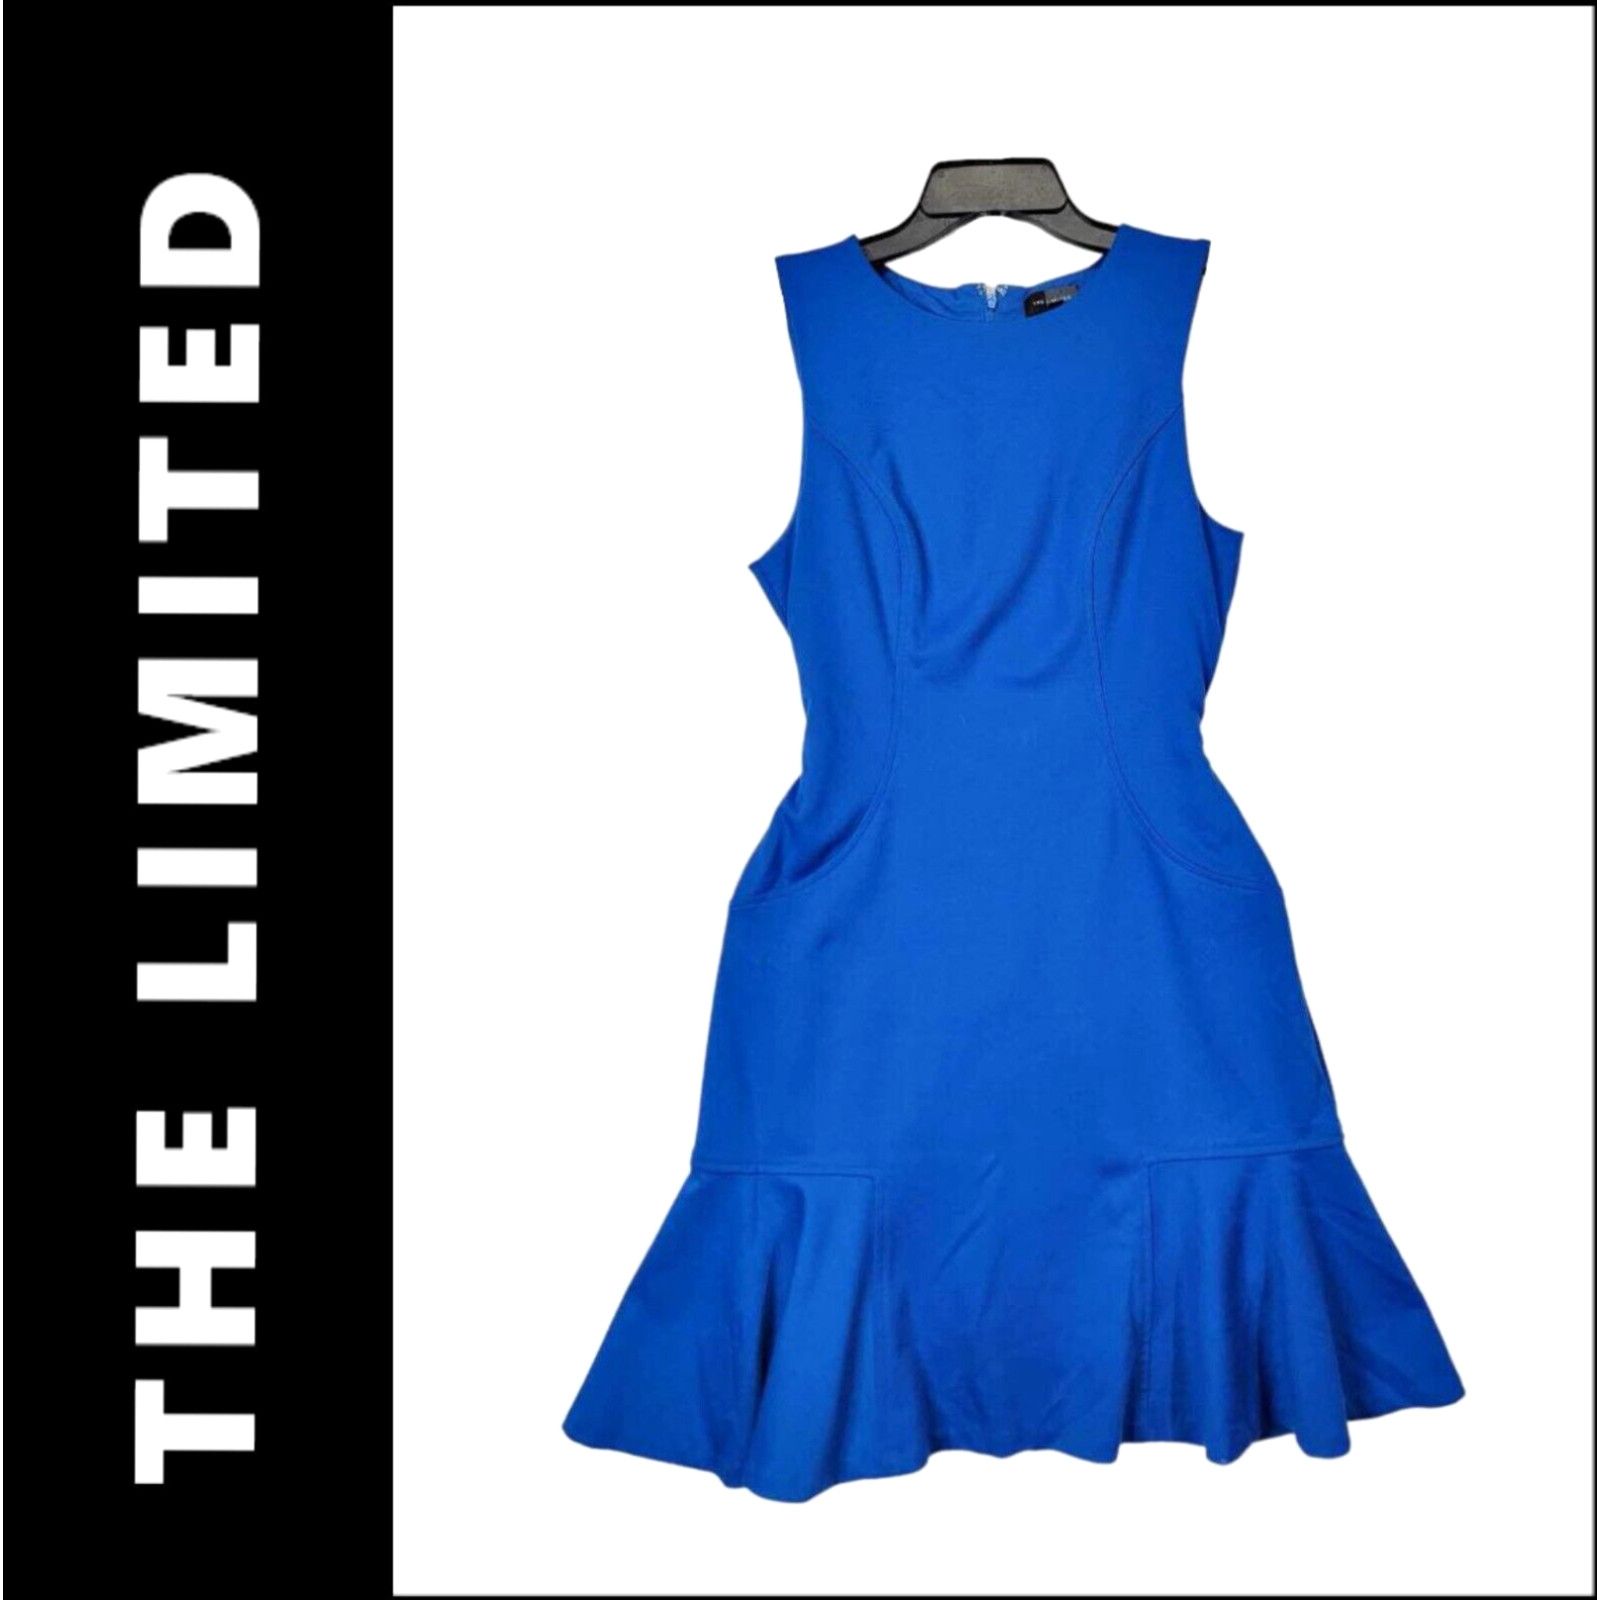 Vintage The Limited Dress Blue Size 2 Stretch Women Sleeveless Fit & Flare Size XS / US 0-2 / IT 36-38 - 1 Preview